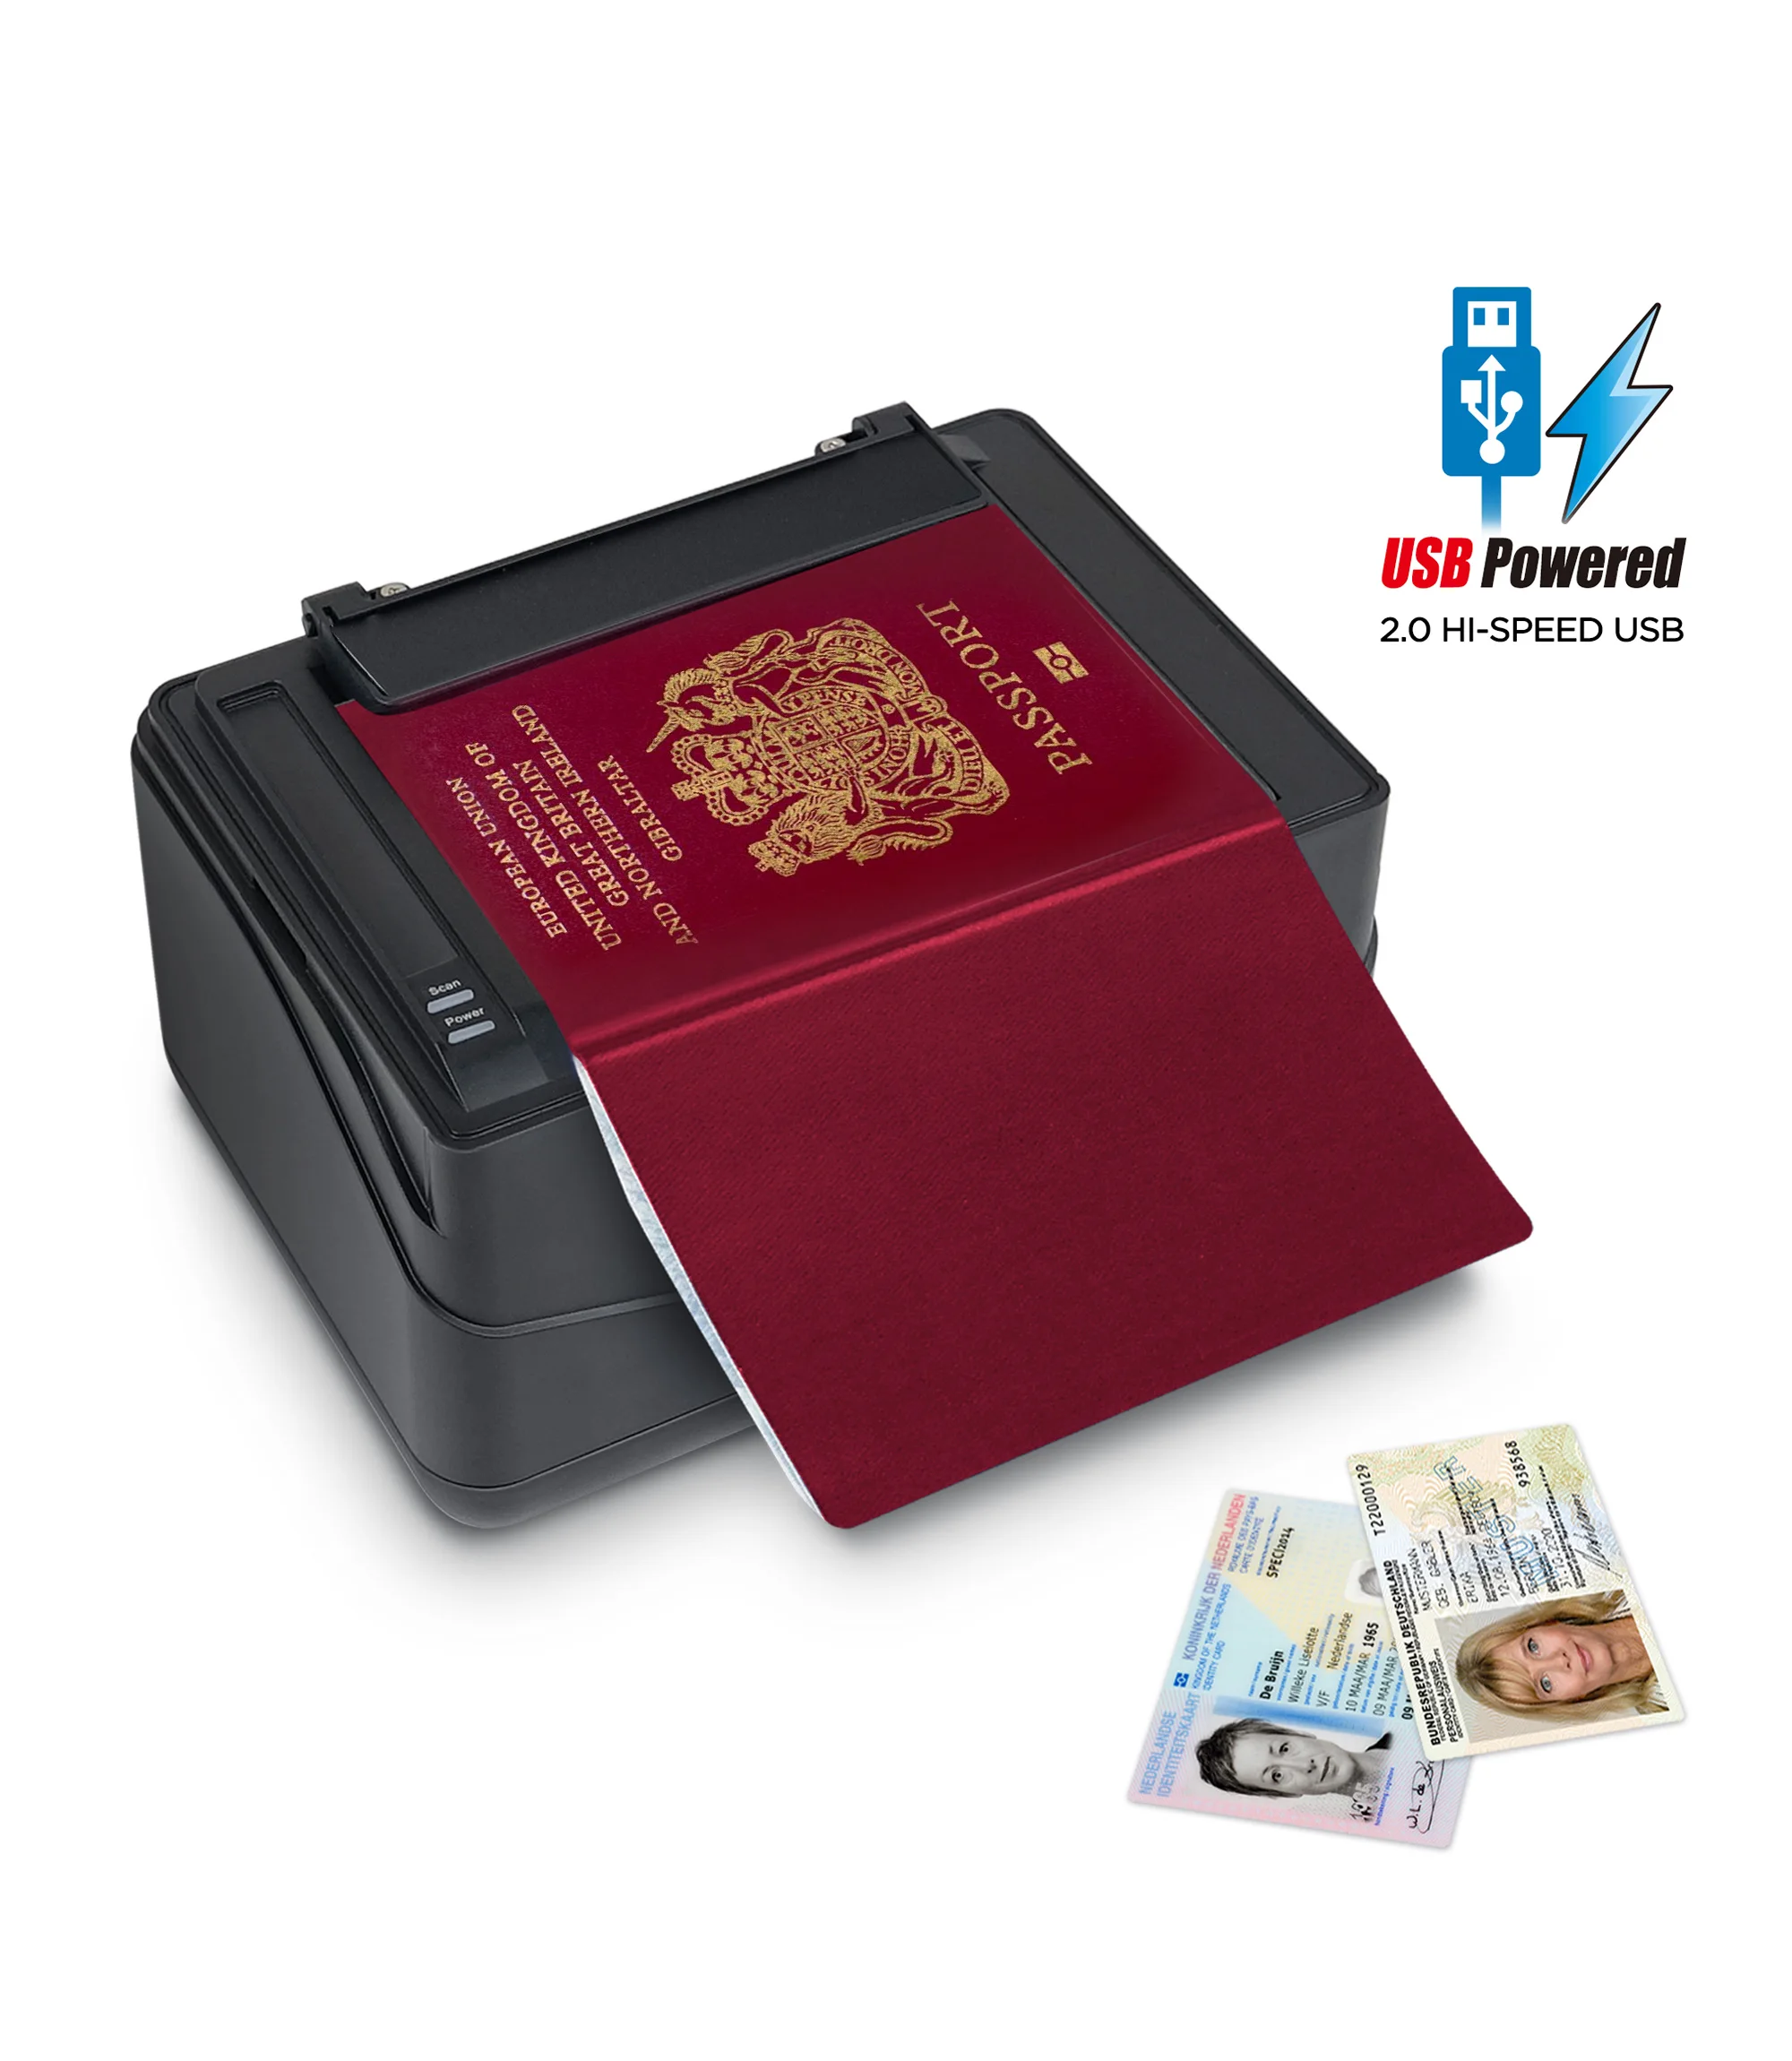 

Plustek X-Mini - Passport Scanner , ID Drivers License Reader - Read Compatible ICAO Doc 9303 Standard with Recognition Software